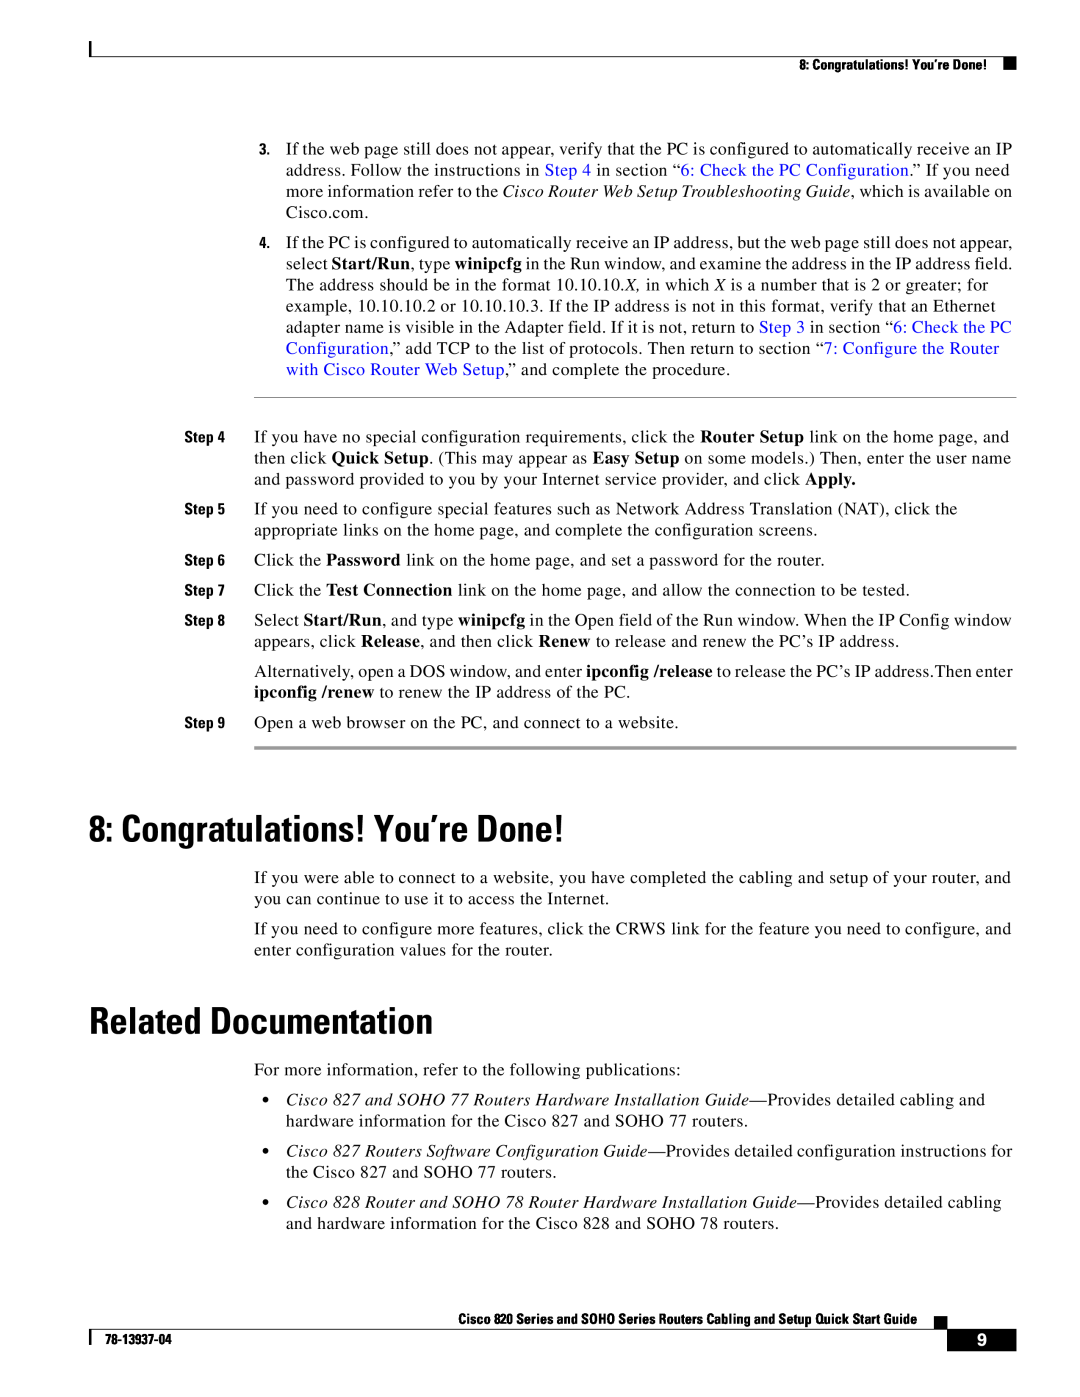 Cisco Systems 820 Series quick start Congratulations! You’re Done, Related Documentation 